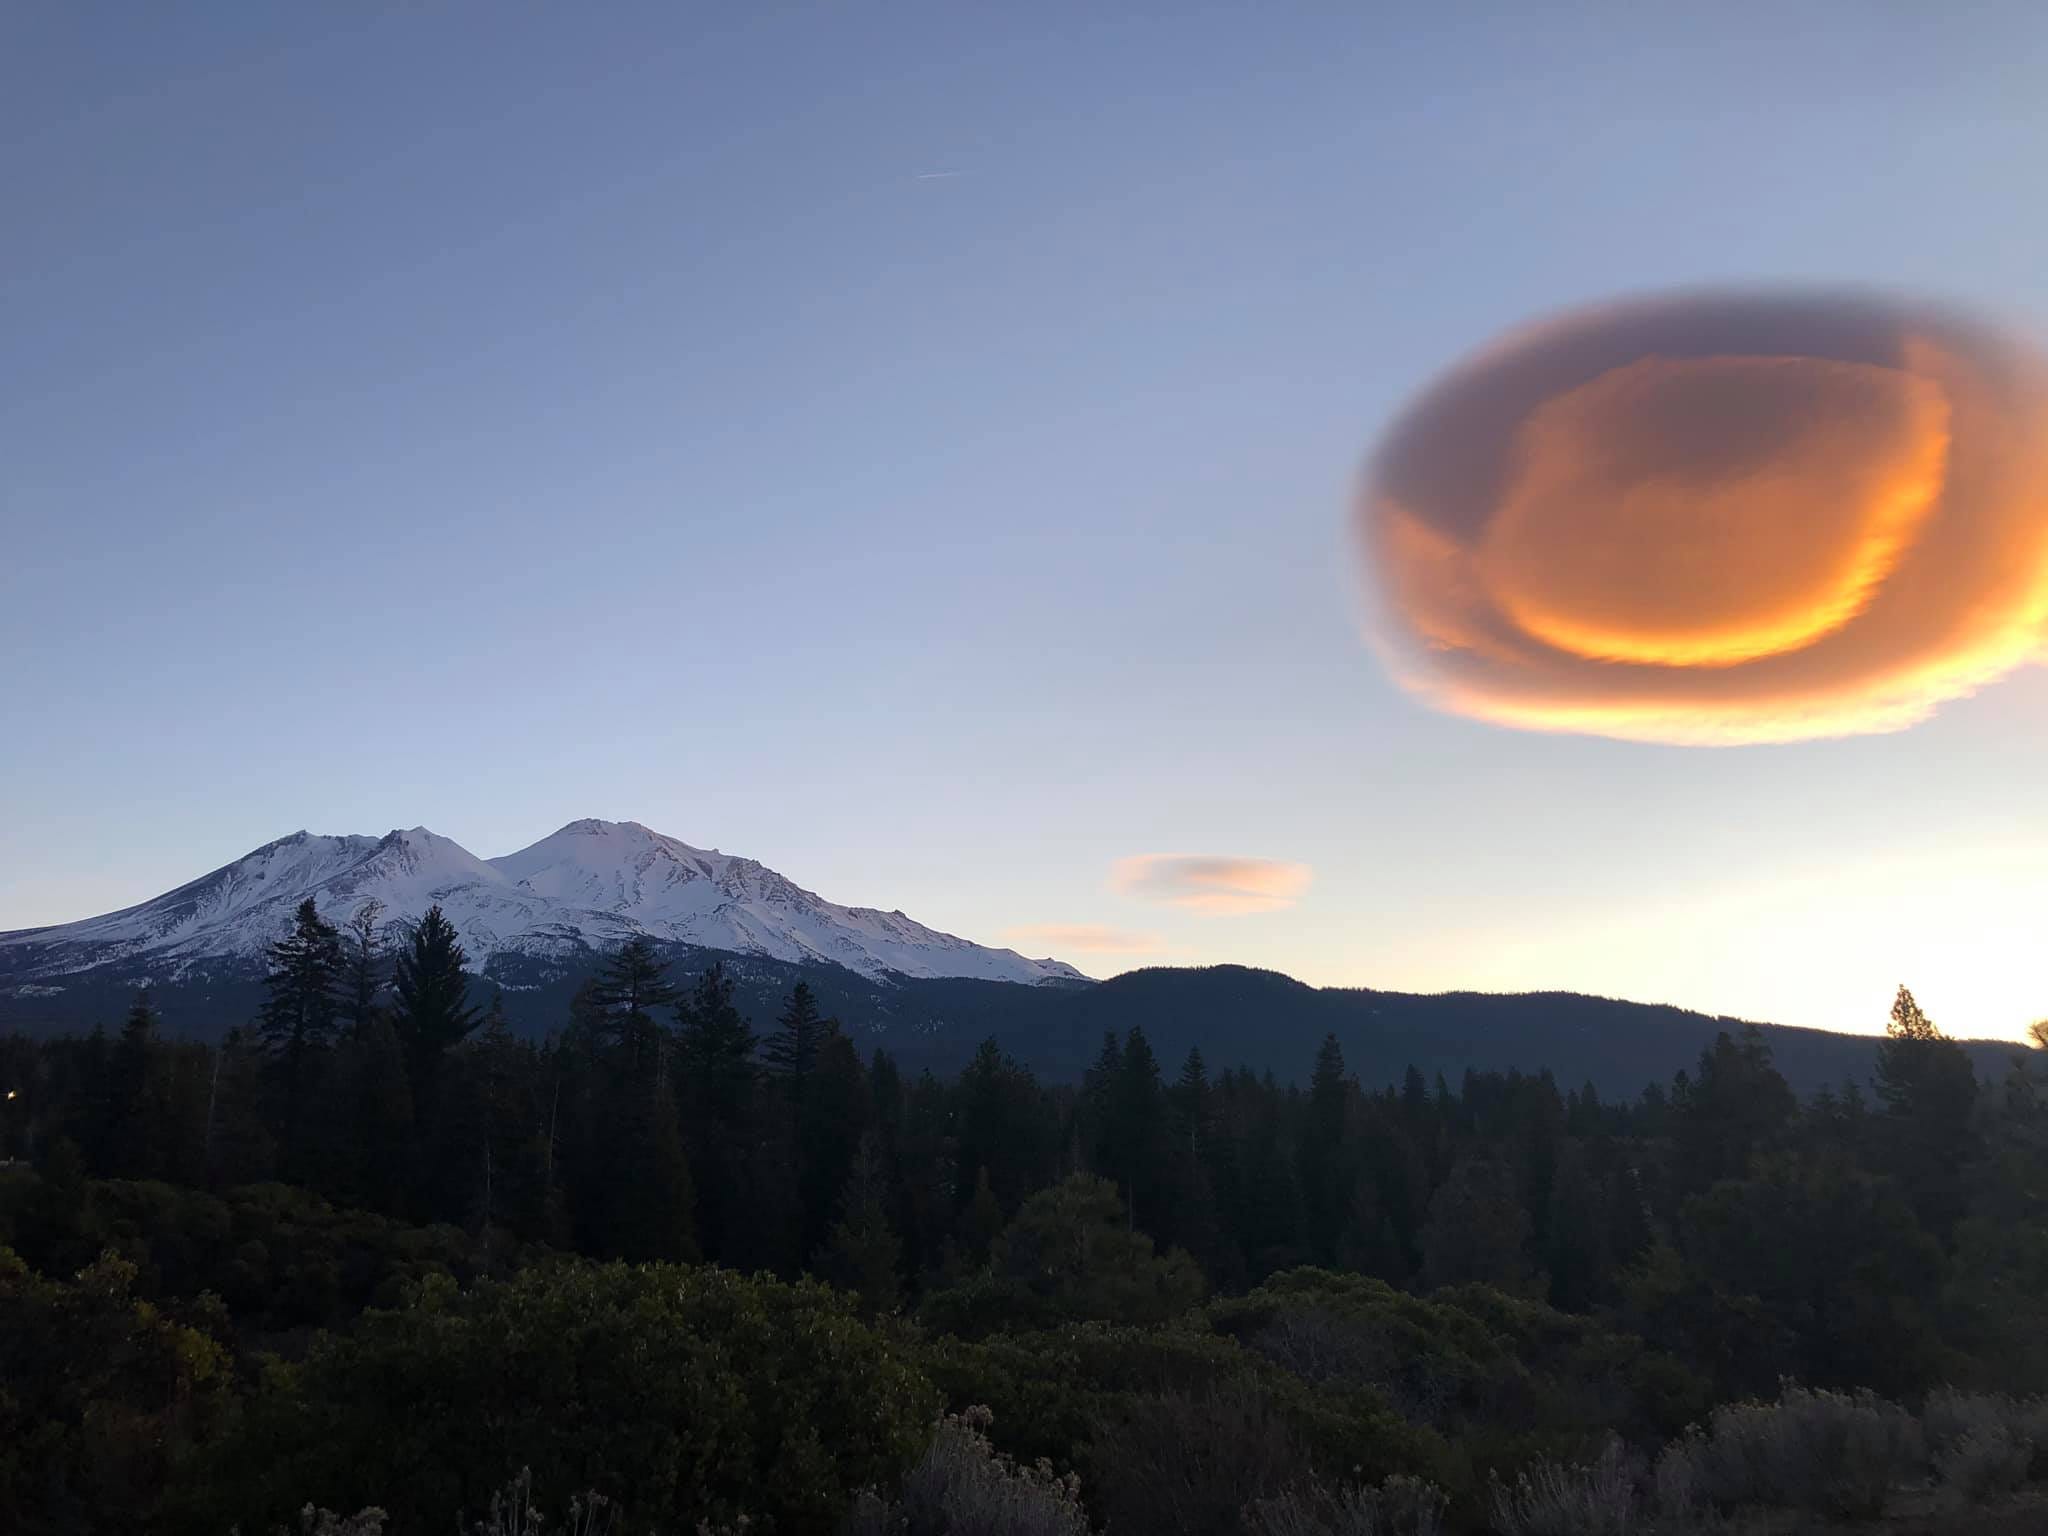 A lenticular and Mt. Shasta in February 2020, submitted by Suzzanne Mendenhall.